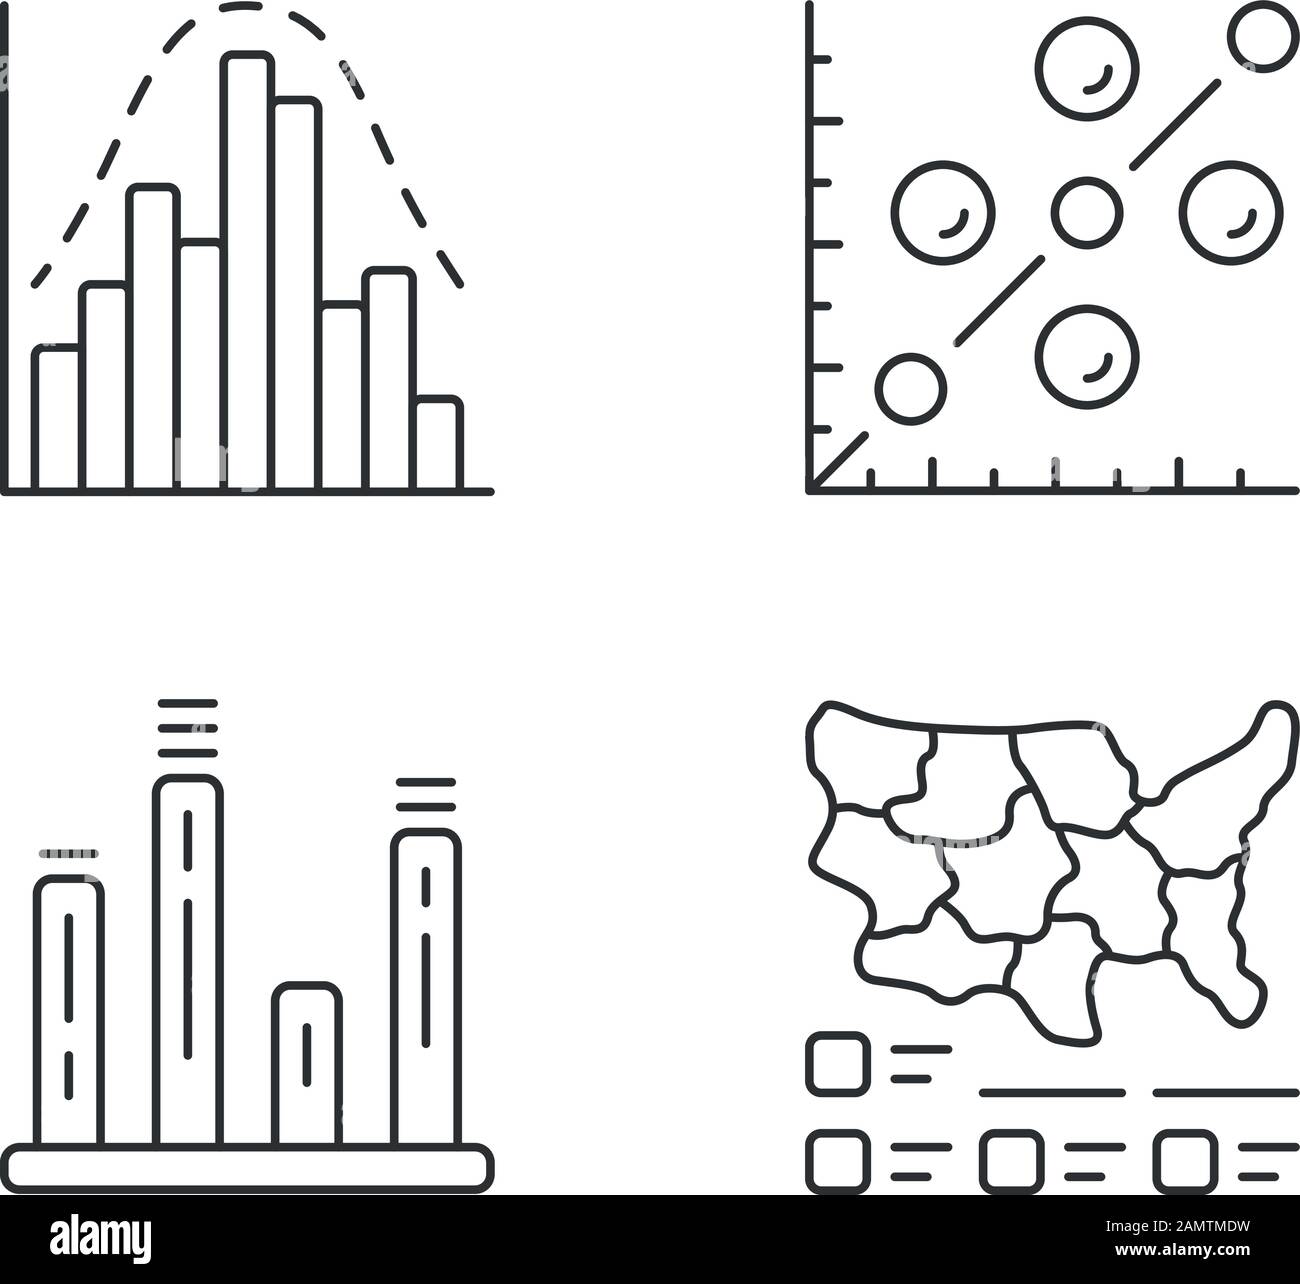 Diagrams linear icons set. Histogram, bar graph, scatter plot, cartogram. Statistics data. Analytical information. Thin line contour symbols. Isolated Stock Vector